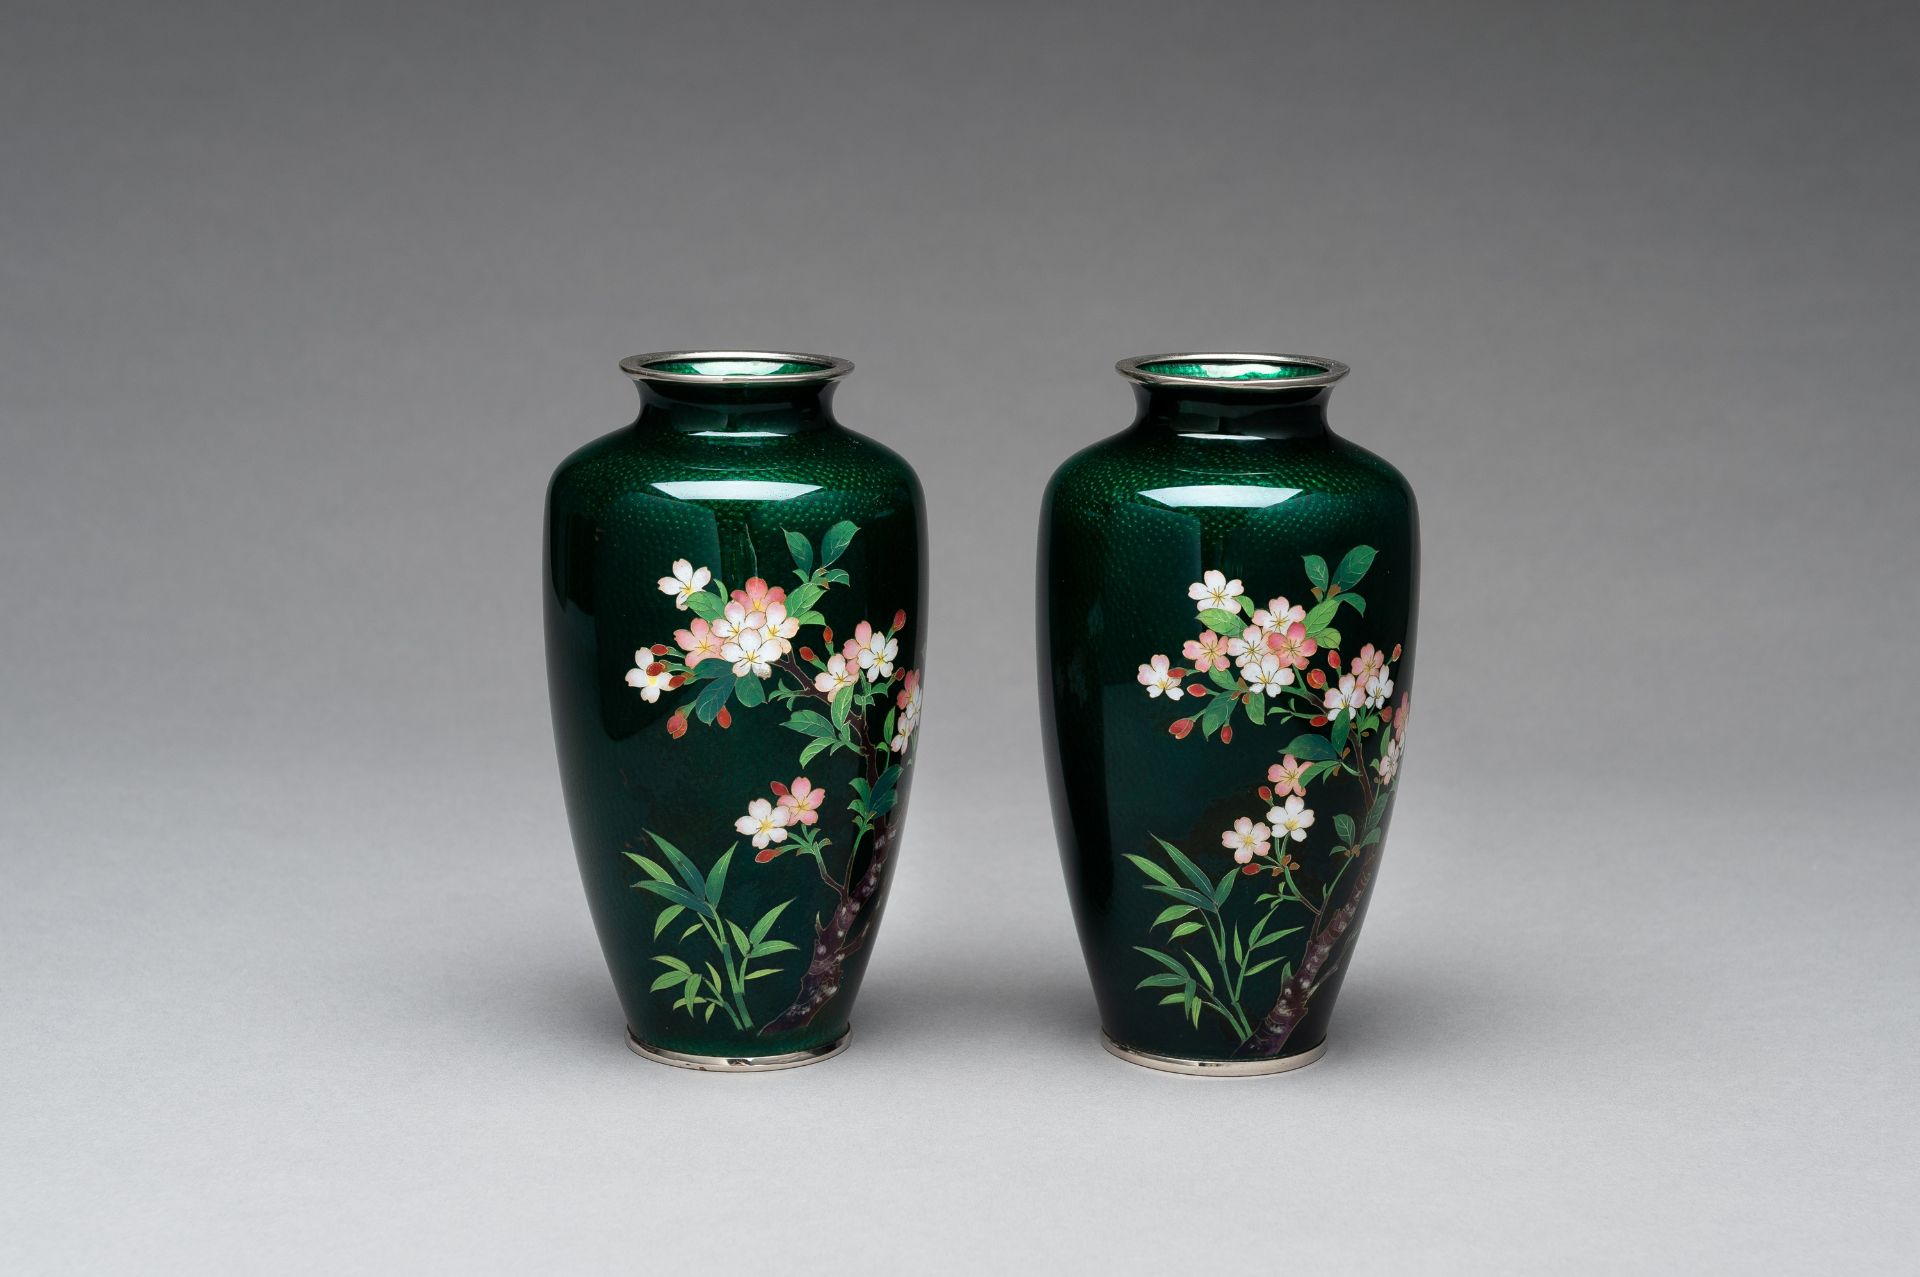 A PAIR OF ANDO STYLE GINBARI CLOISONNE VASES - Image 6 of 8